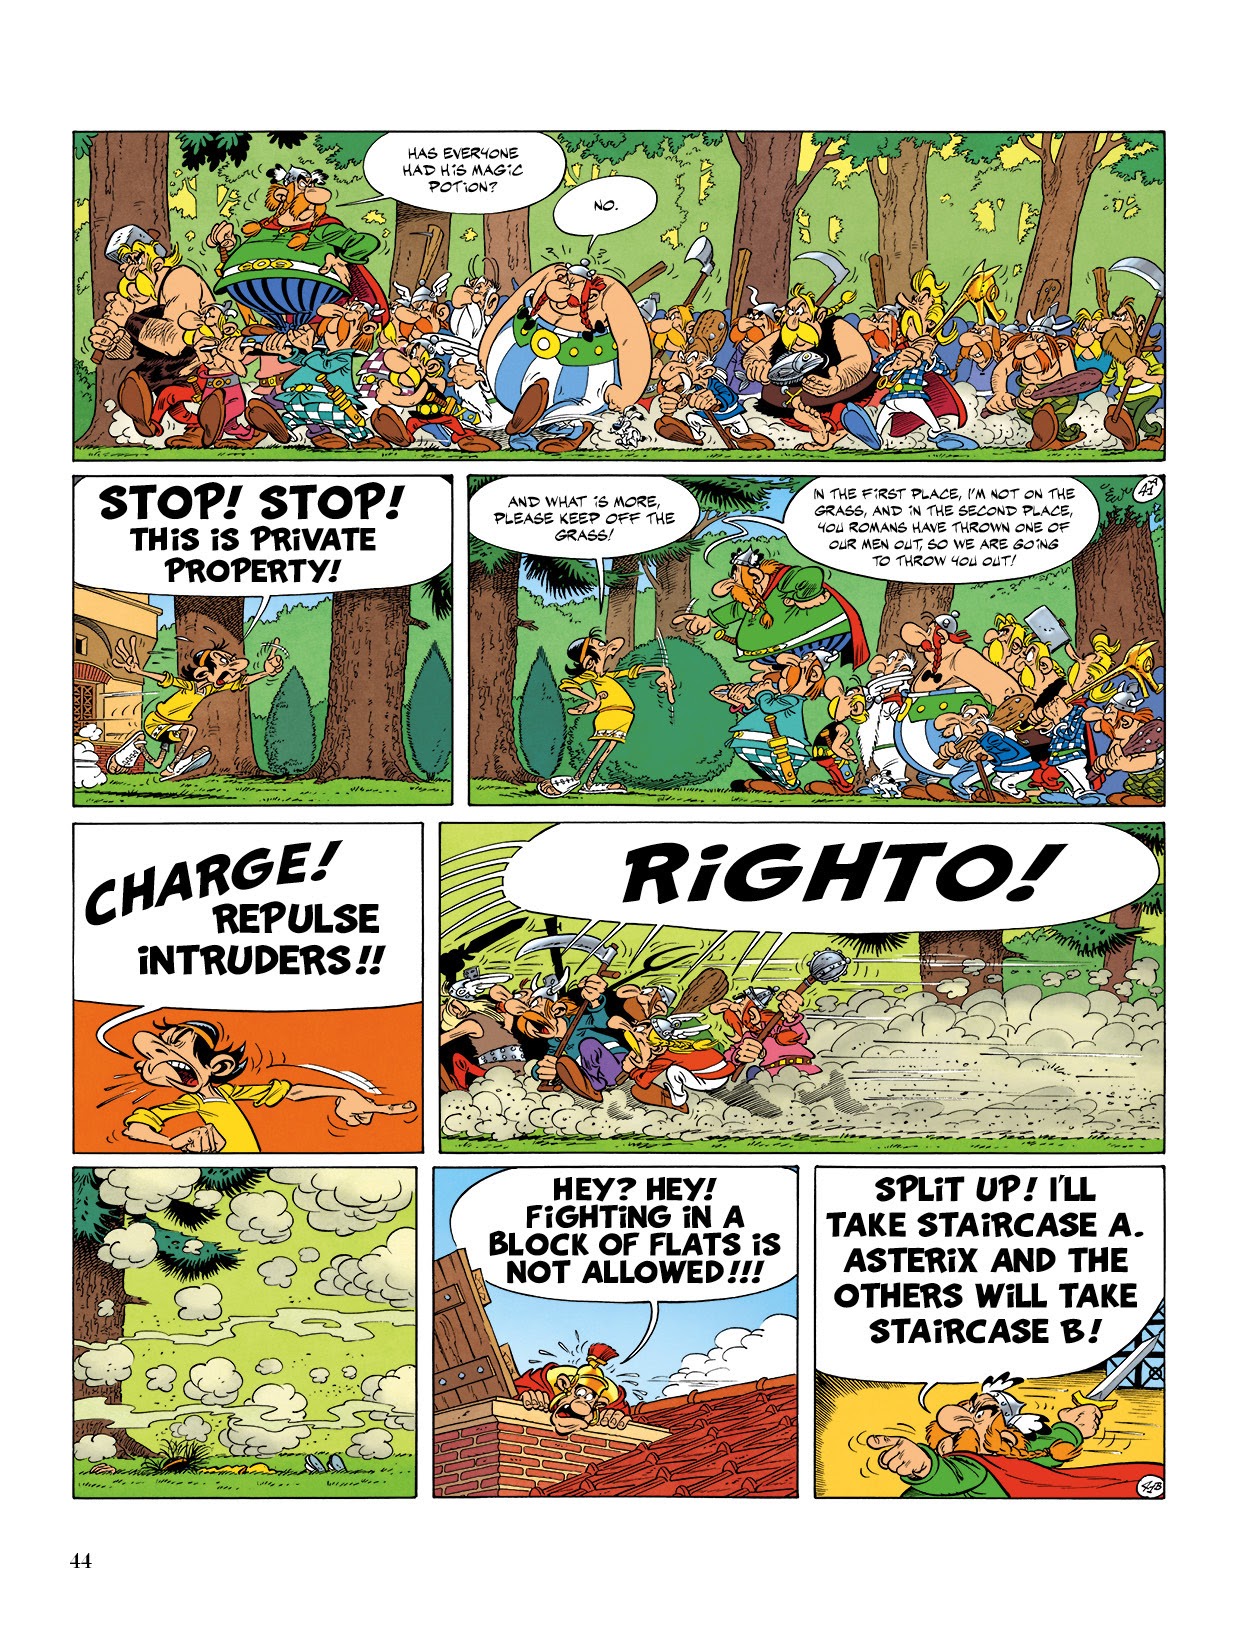 Read online Asterix comic -  Issue #17 - 45